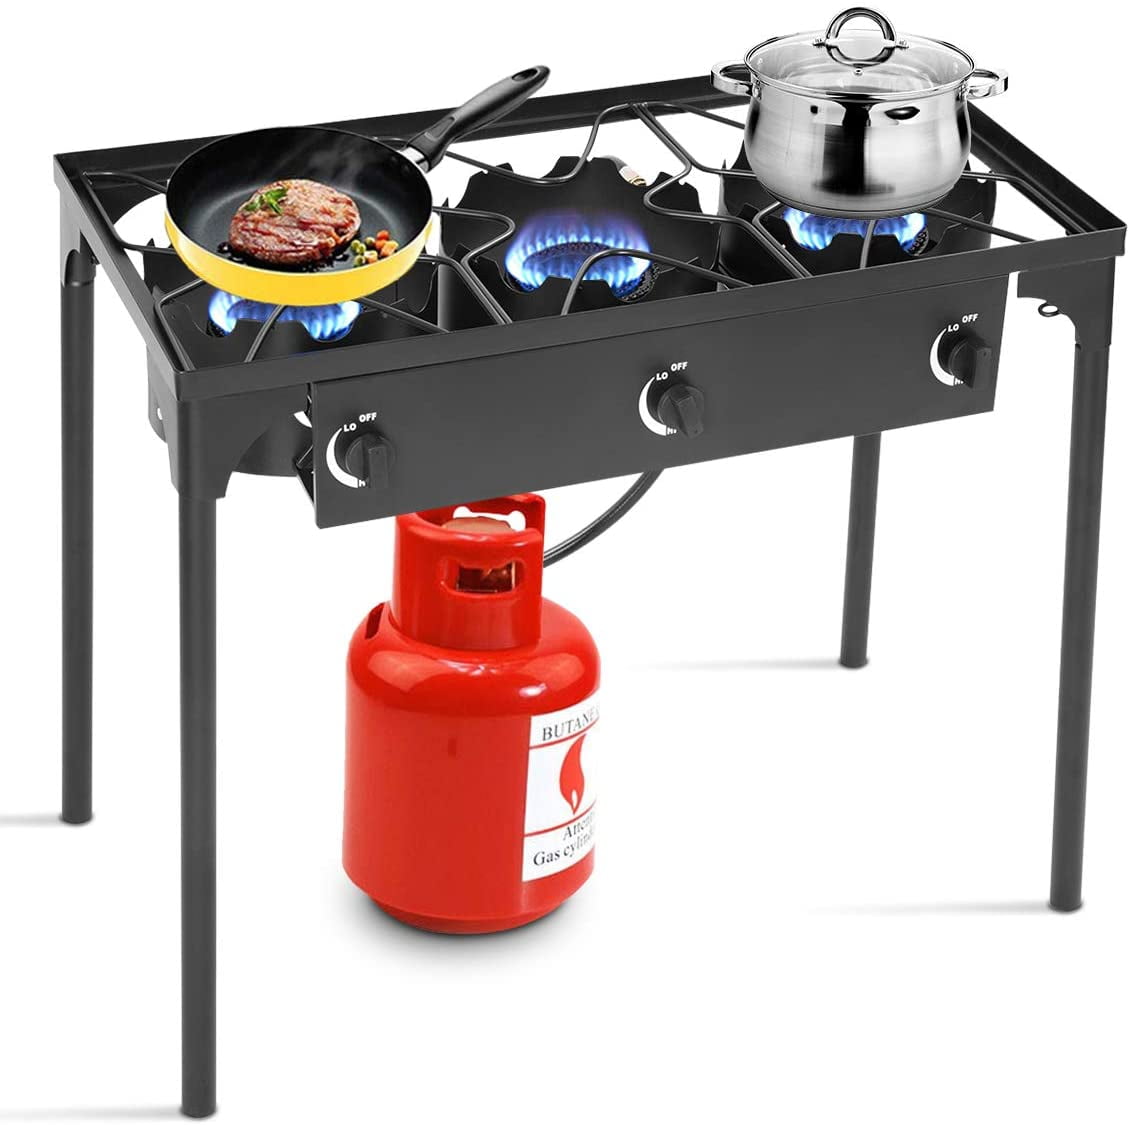 Outdoor Cooker Heating Stove Wax Stove Camping And Hiking Portable Travel Stove 